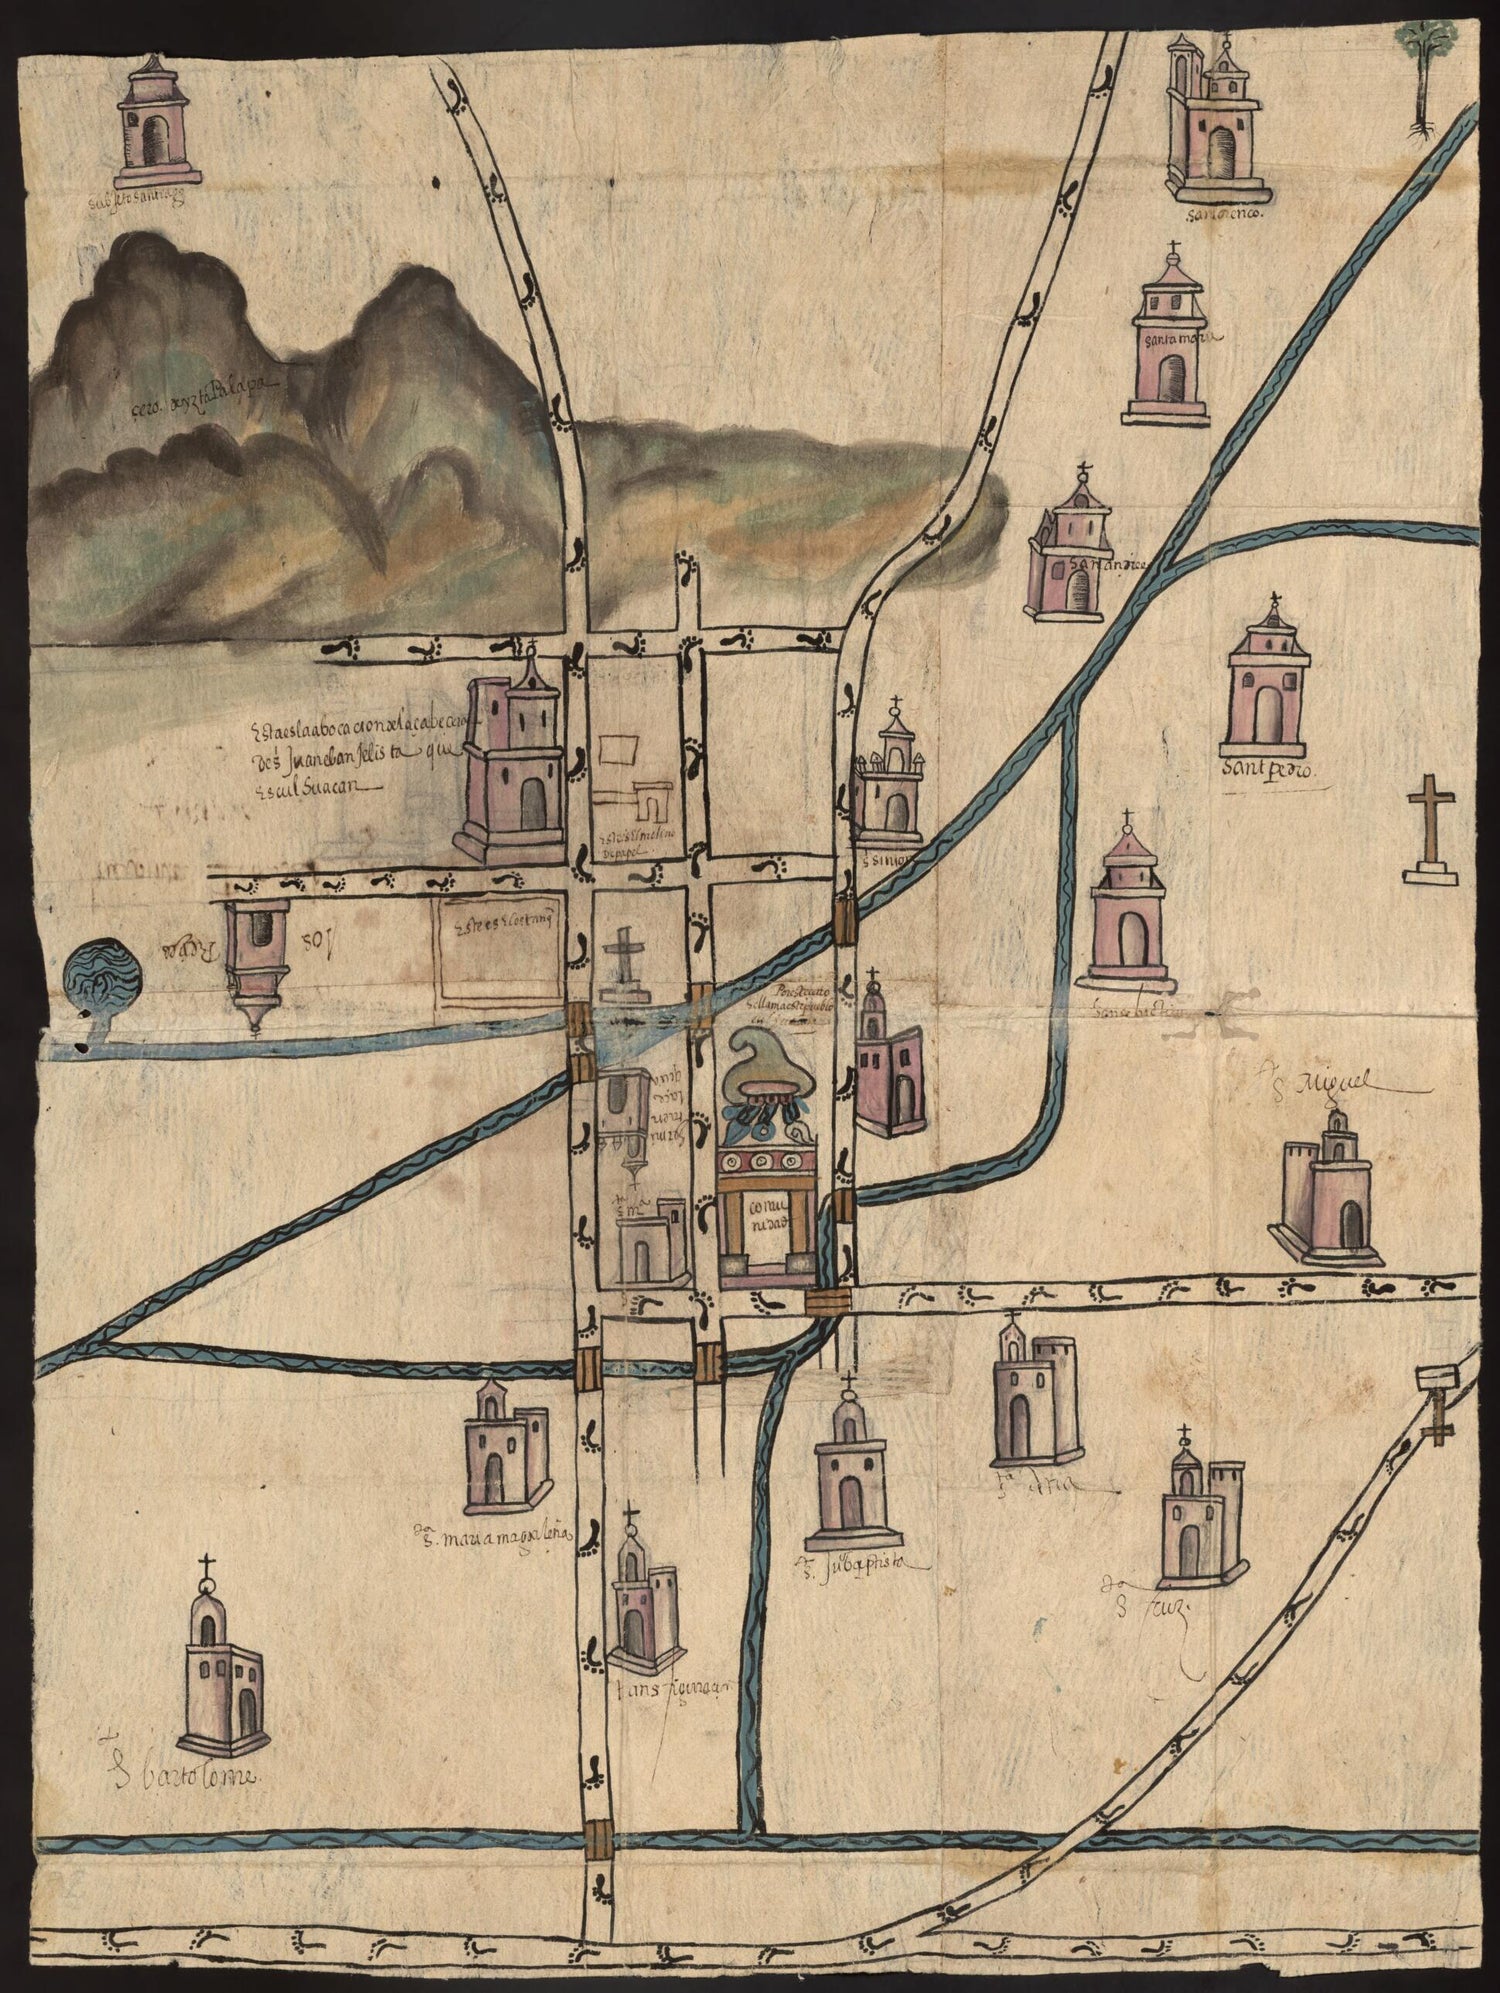 This old map of Culhuacán, Mexico from 1580 was created by  in 1580